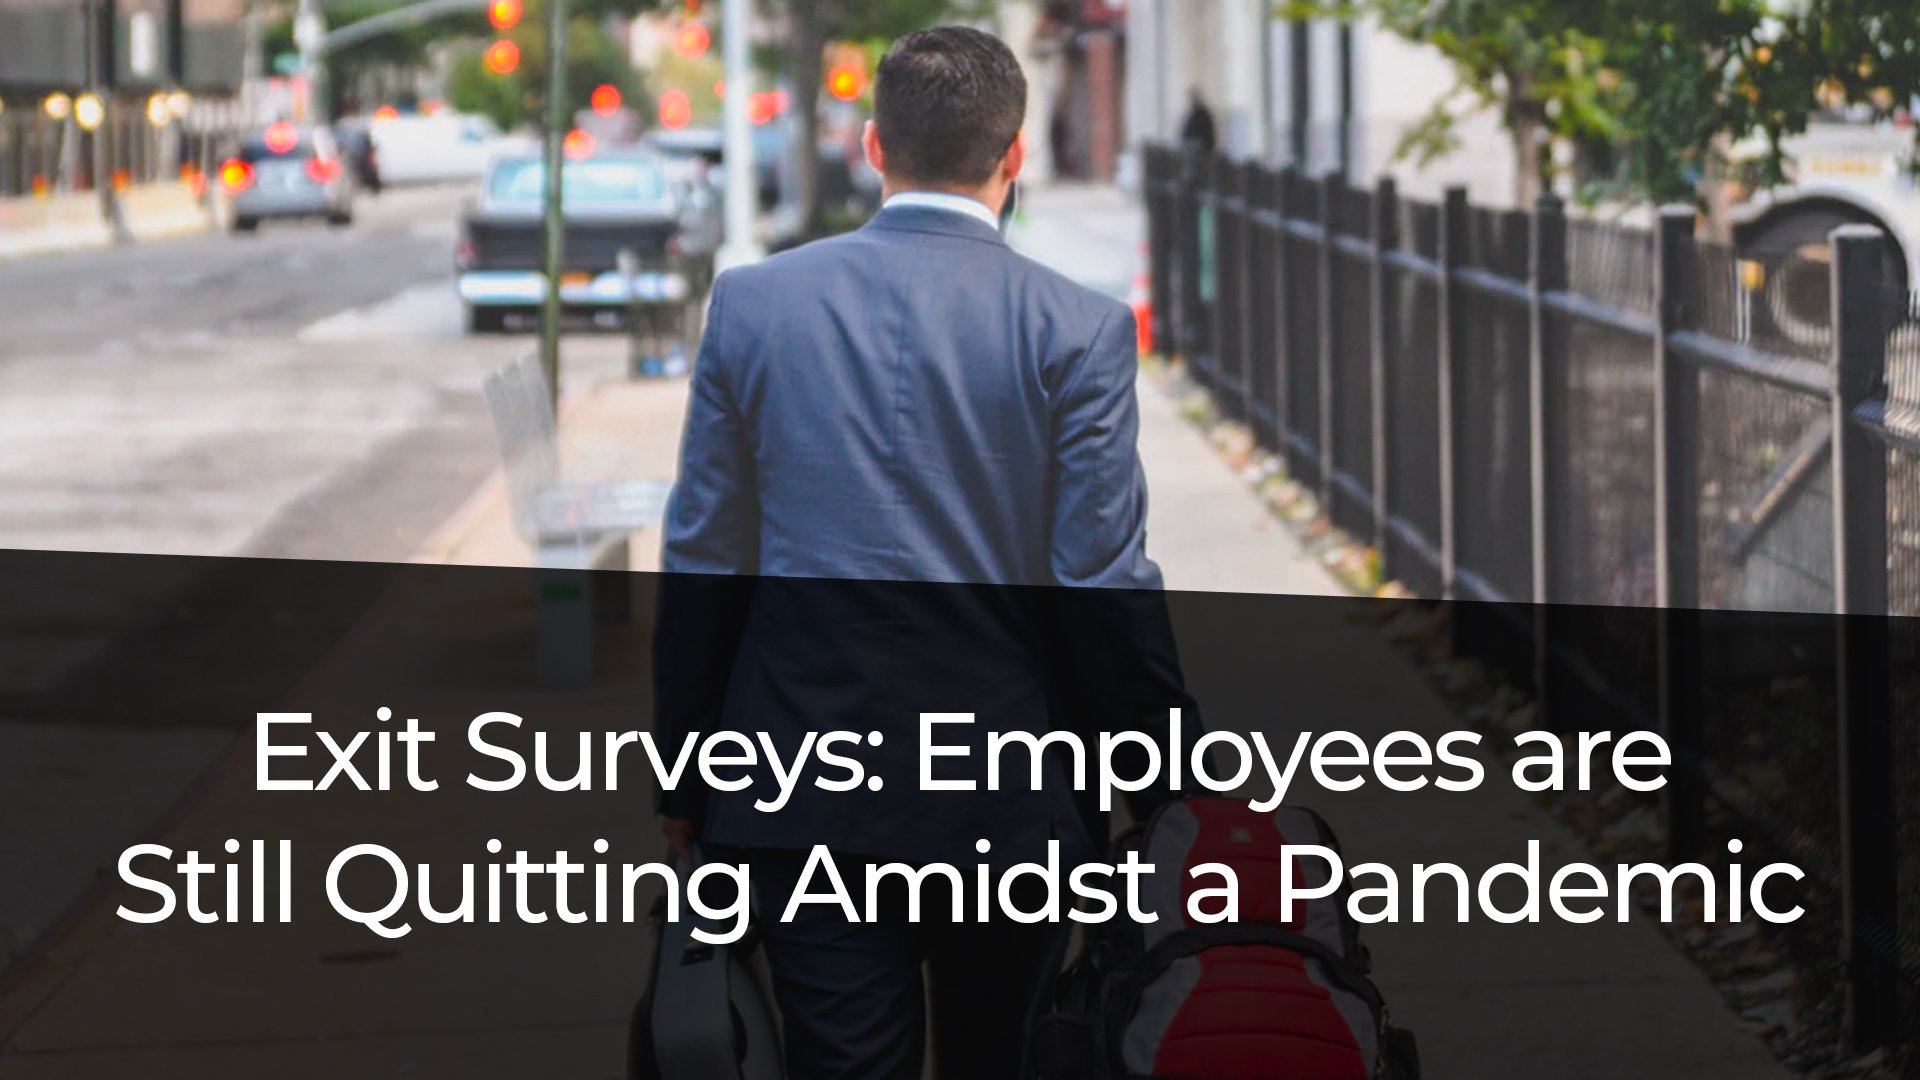 Exit Surveys: Employees are Still Quitting Amidst a Pandemic